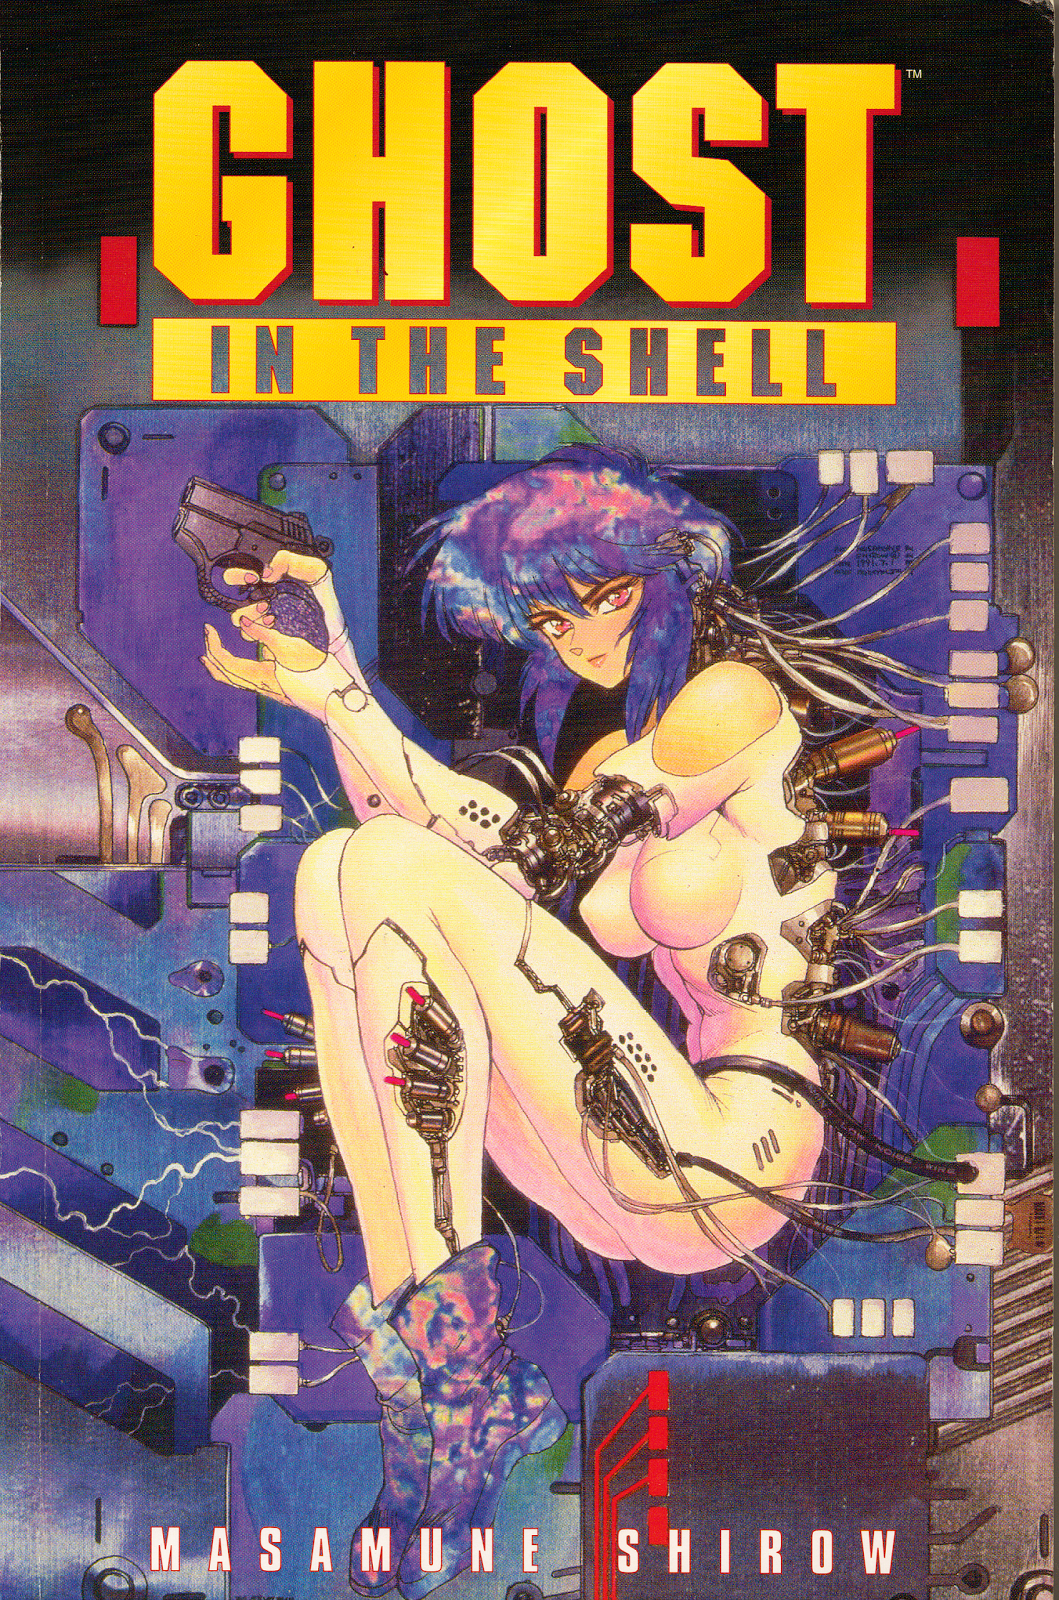 Ghost%20in%20the%20Shell%20-%20Cover.png